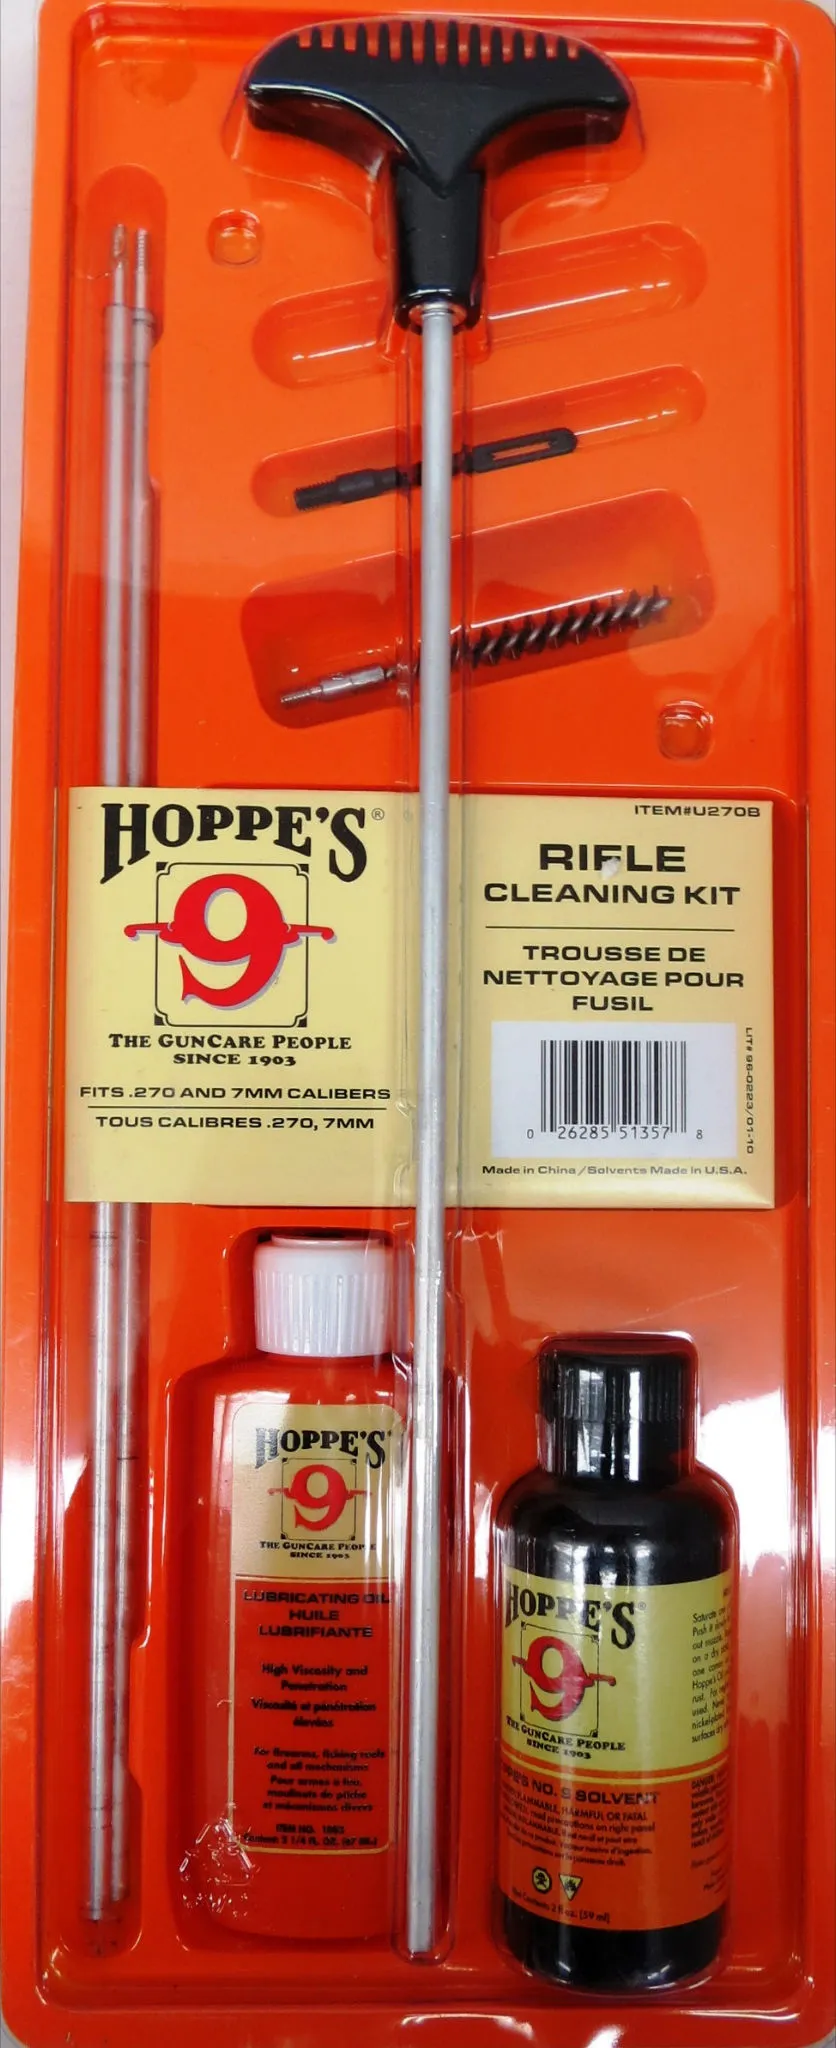 Hoppe's Rifle Clamshell Cleaning Kit